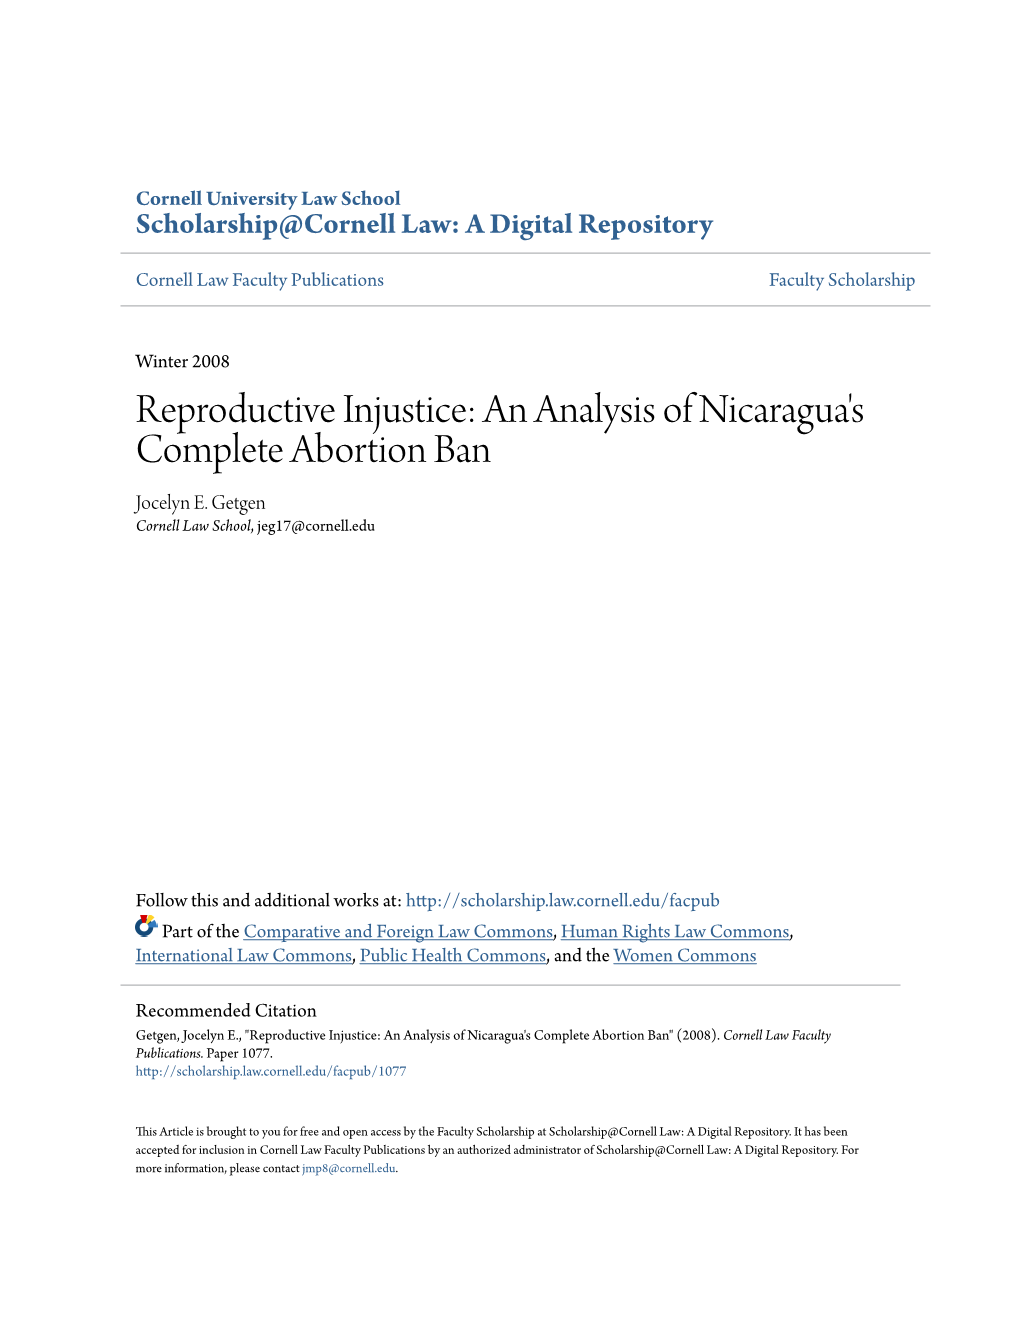 Reproductive Injustice: an Analysis of Nicaragua's Complete Abortion Ban Jocelyn E